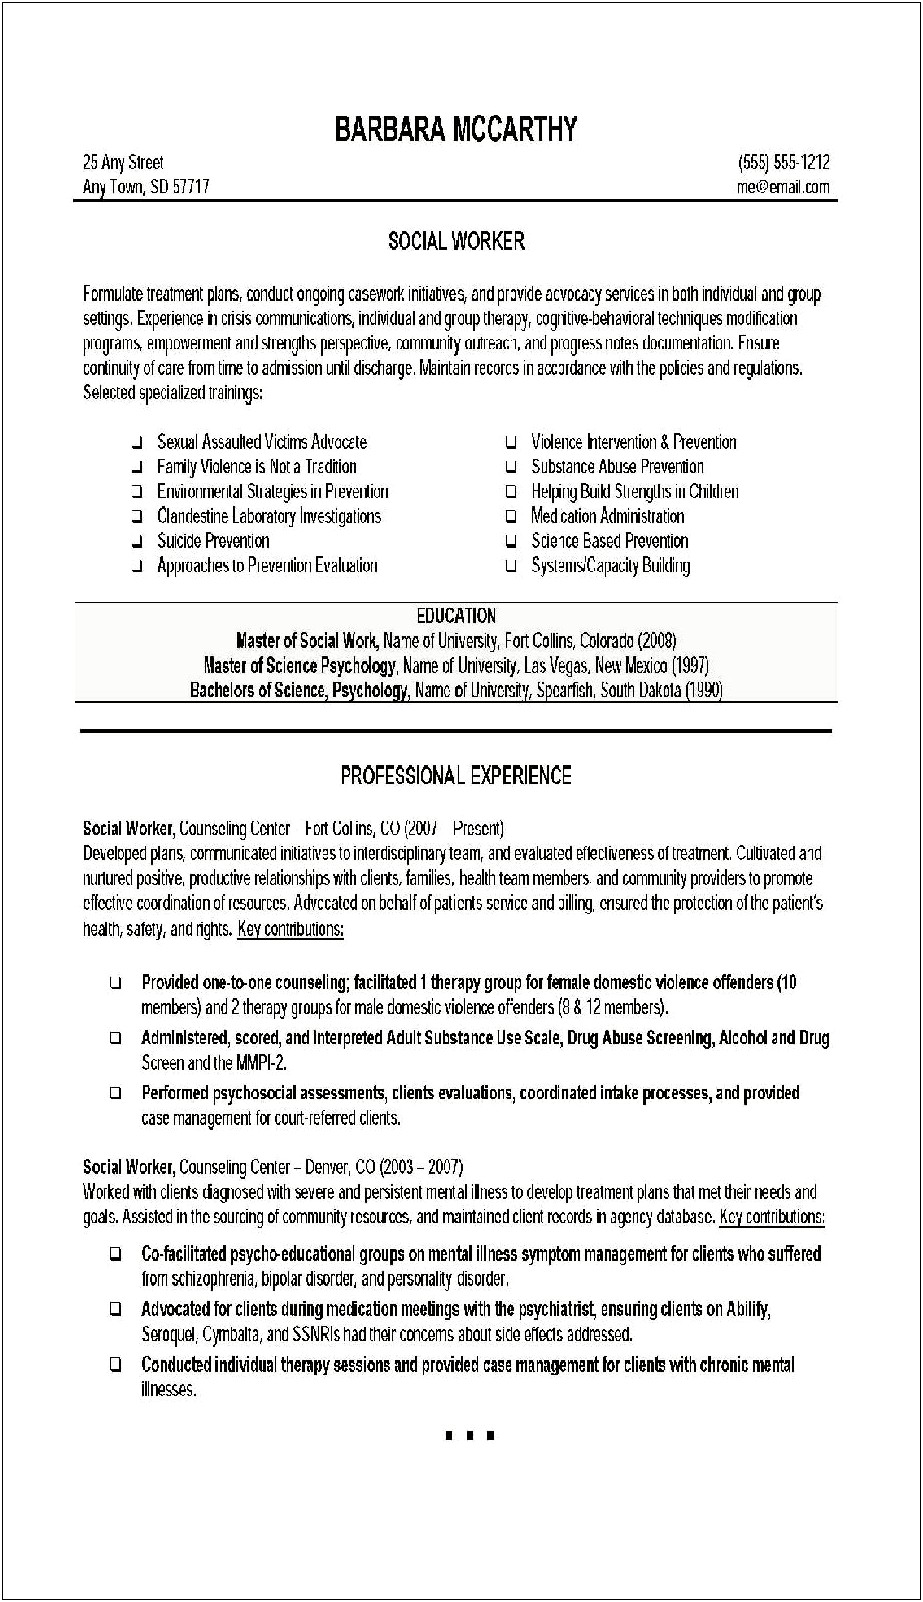 Resume Objective For Social Worker Position